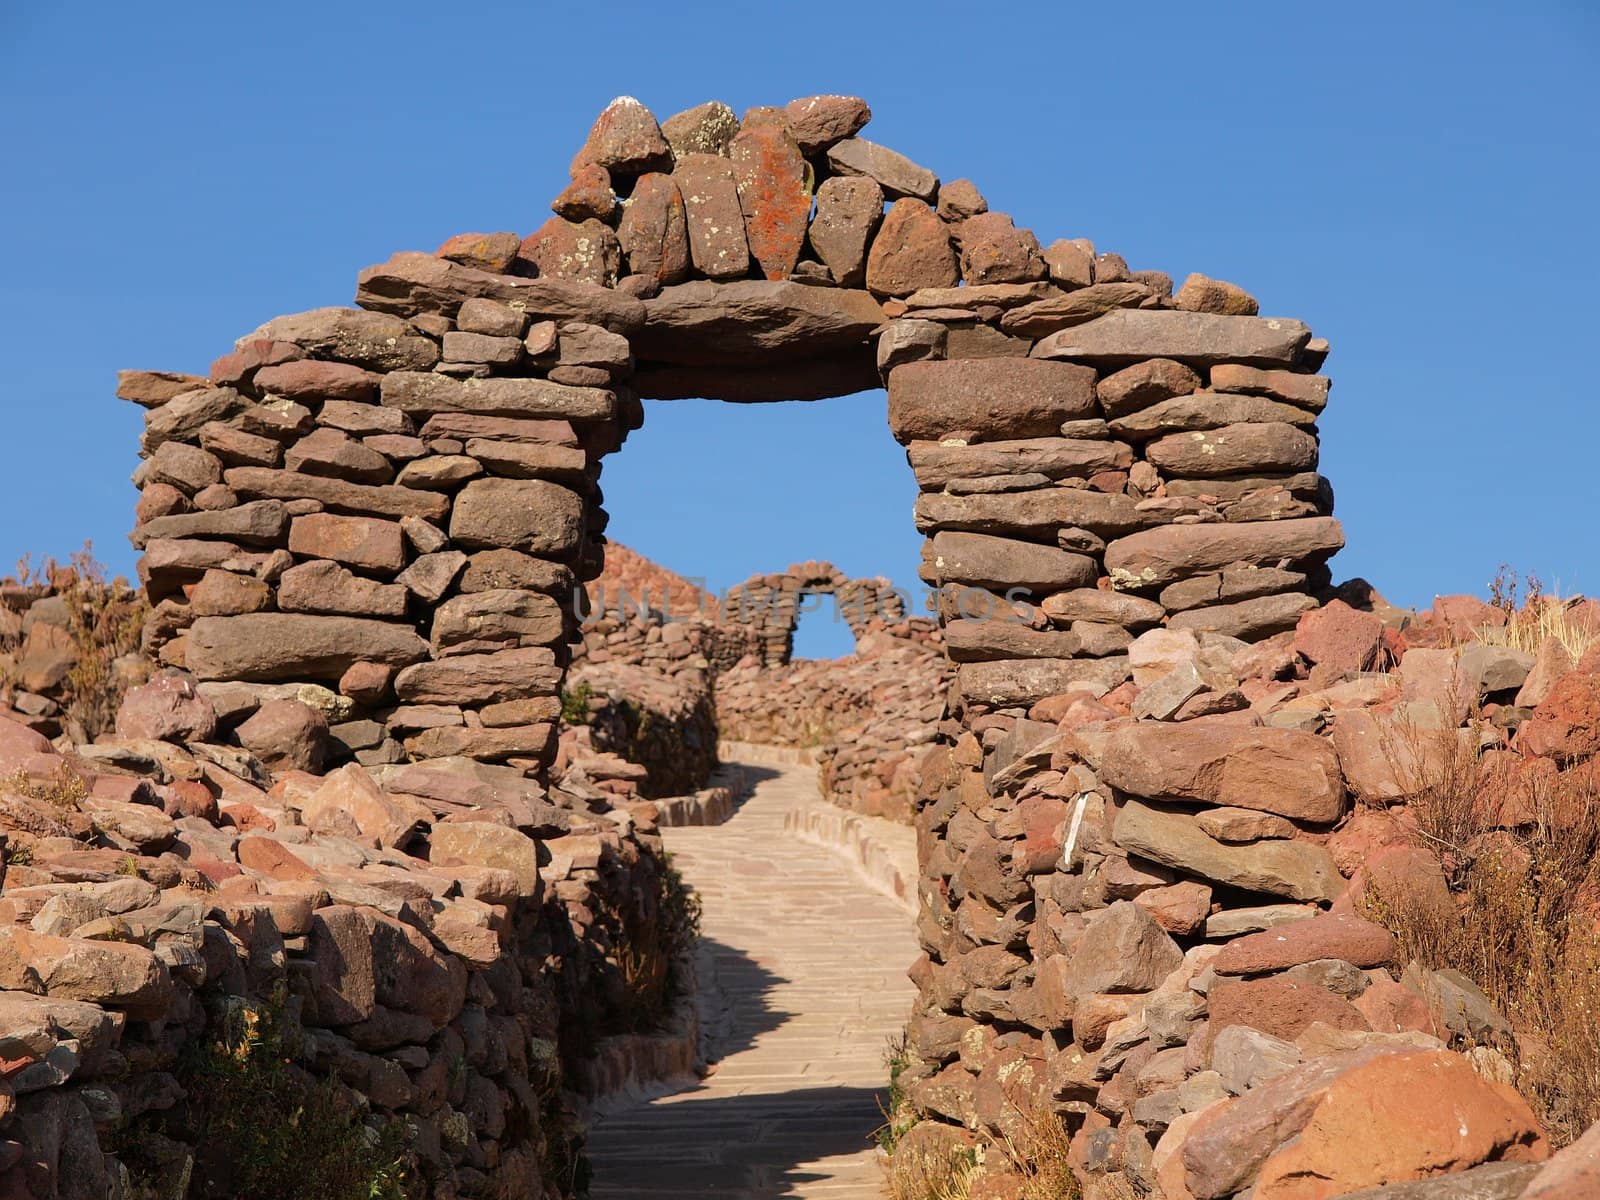 Old arch build out of undressed stones, Amantani Island, Titicaca Lake